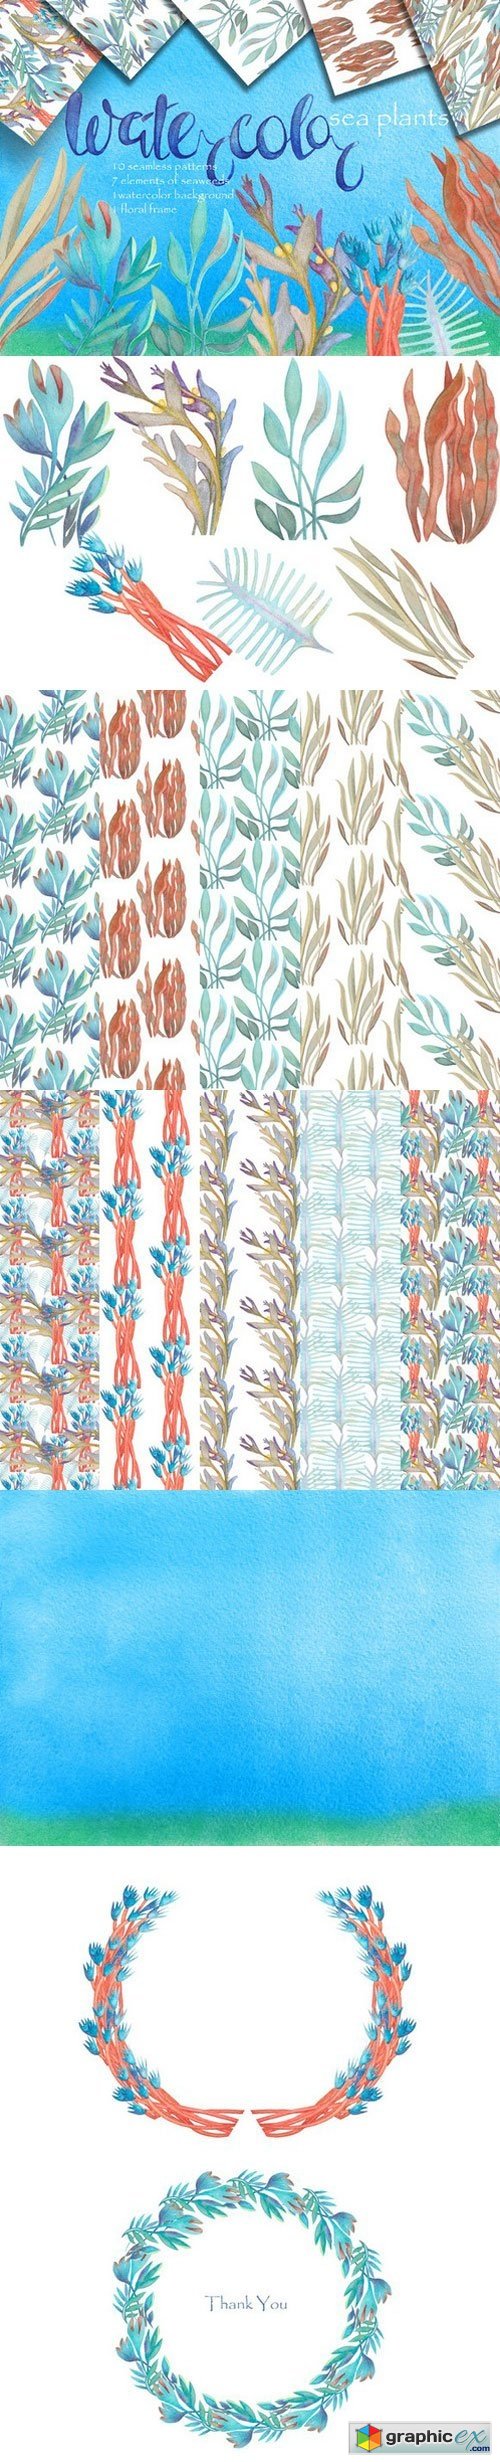 Watercolor sea plants and patterns